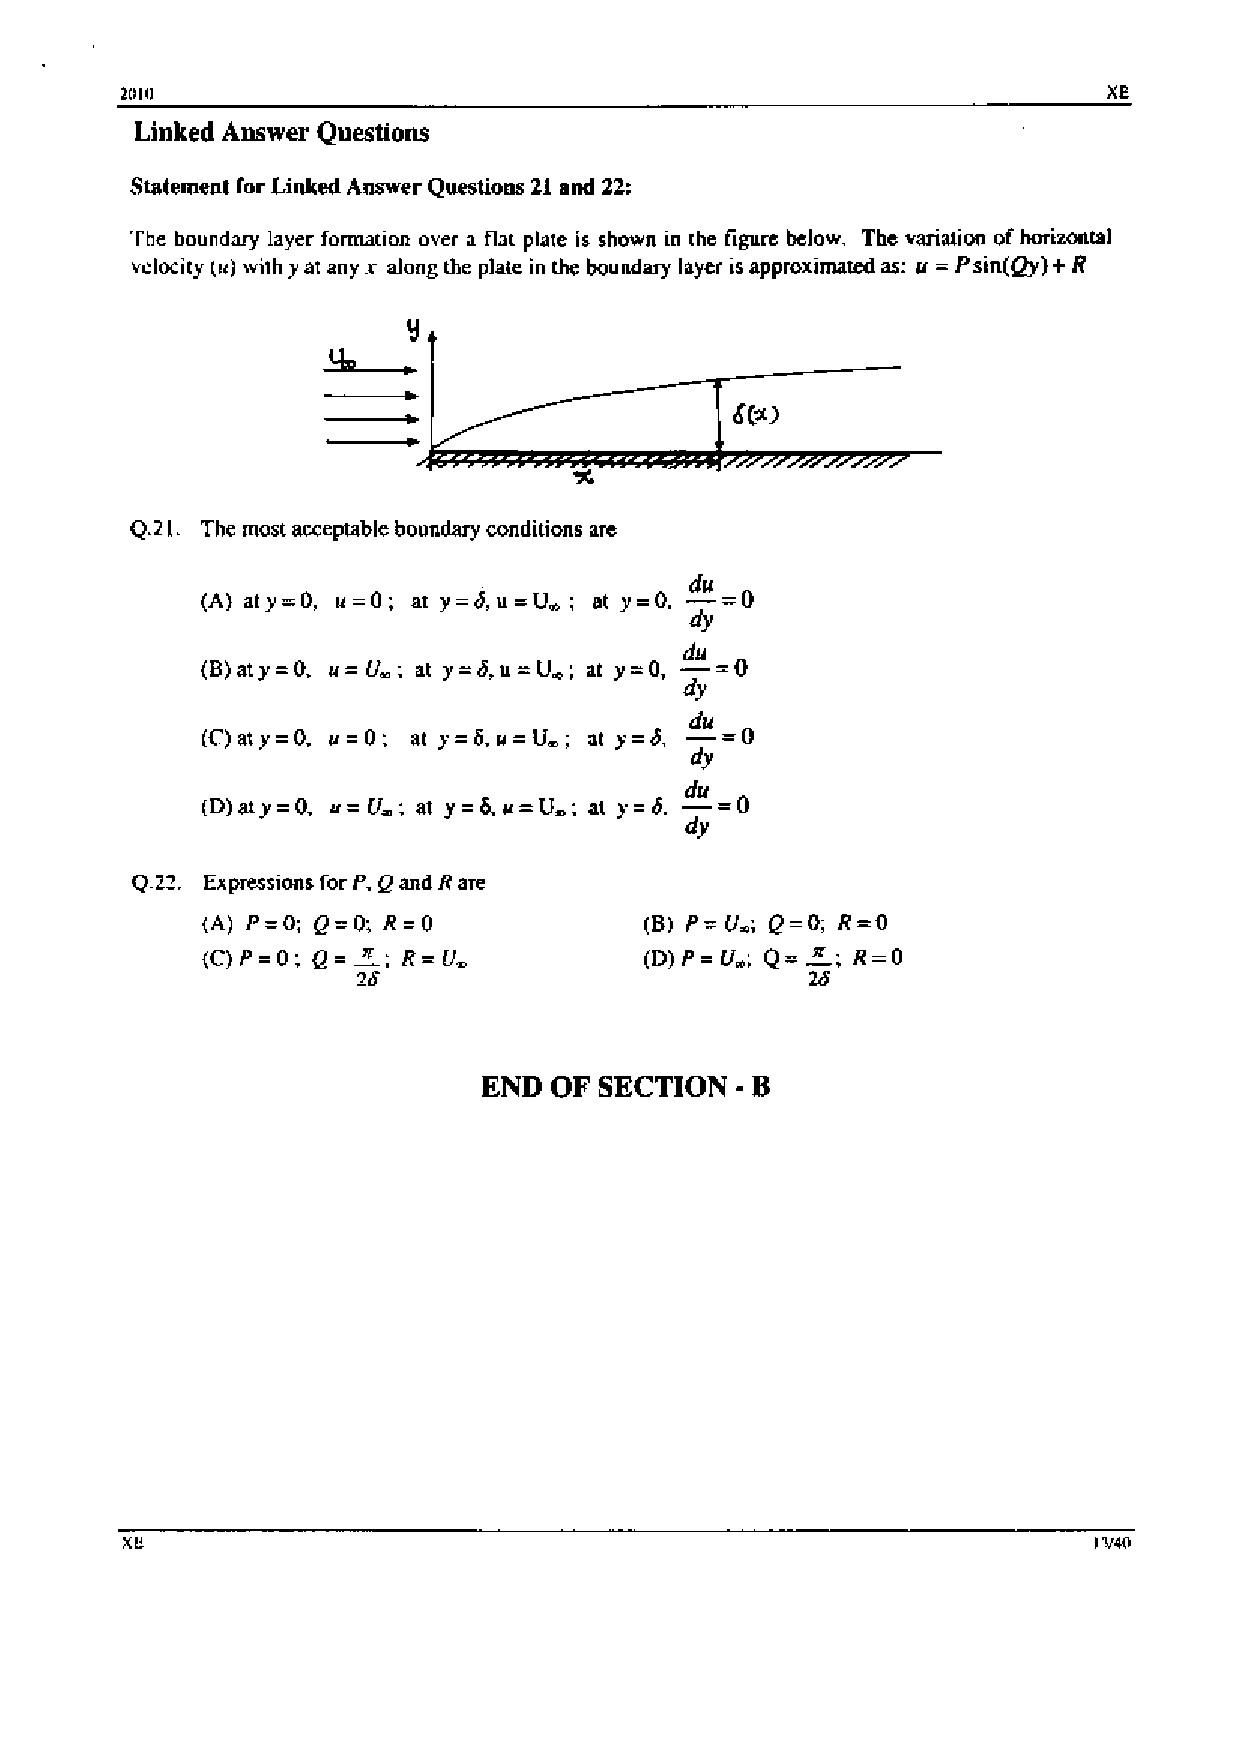 GATE Exam Question Paper 2010 Engineering Sciences 13